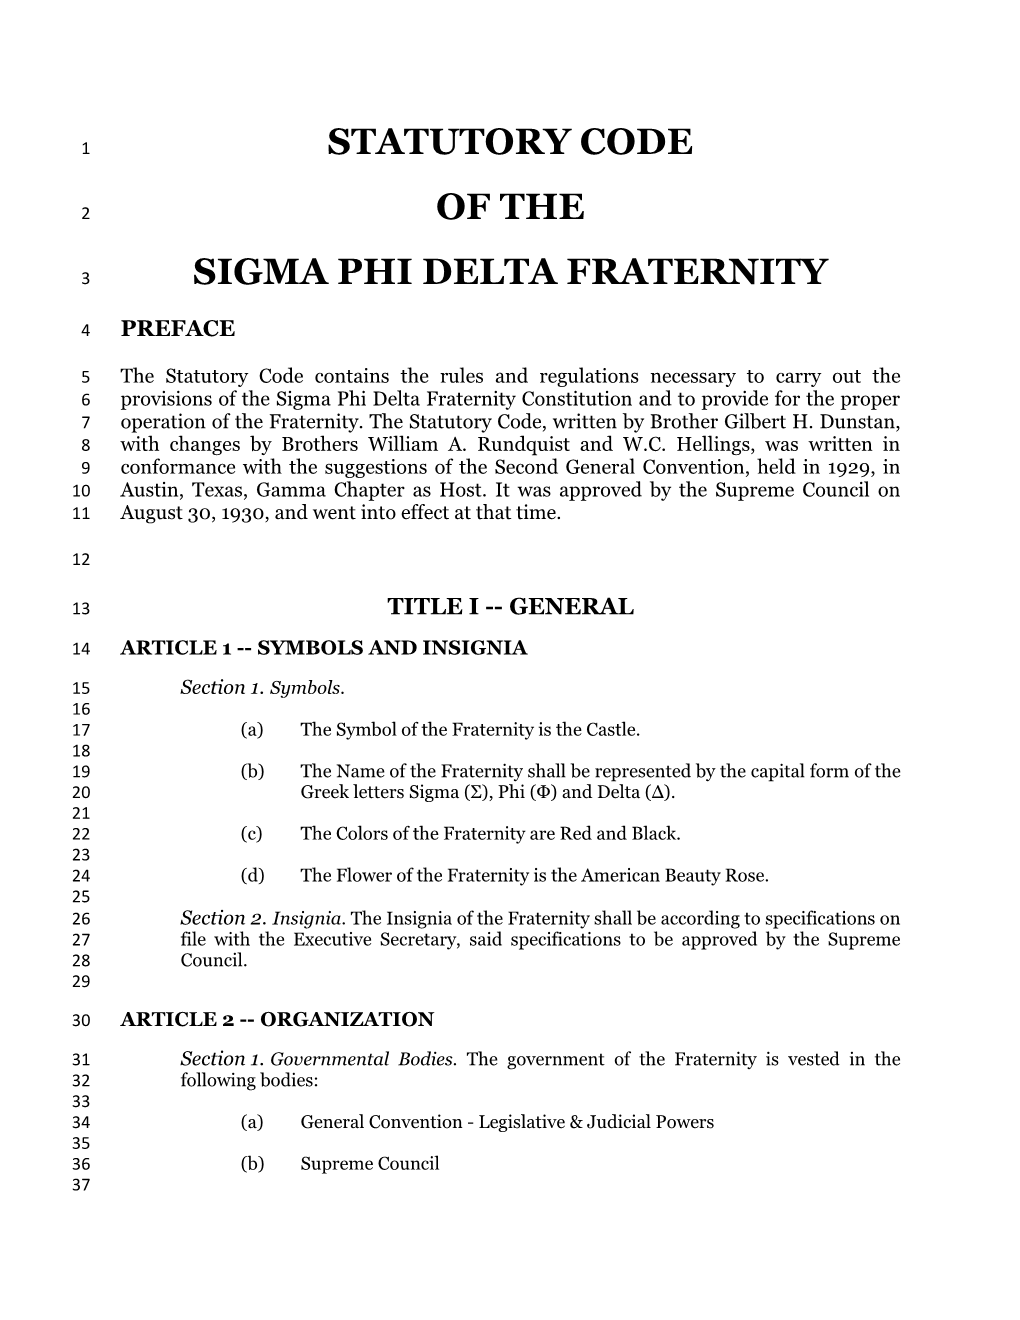 Statutory Code of the Sigma Phi Delta Fraternity